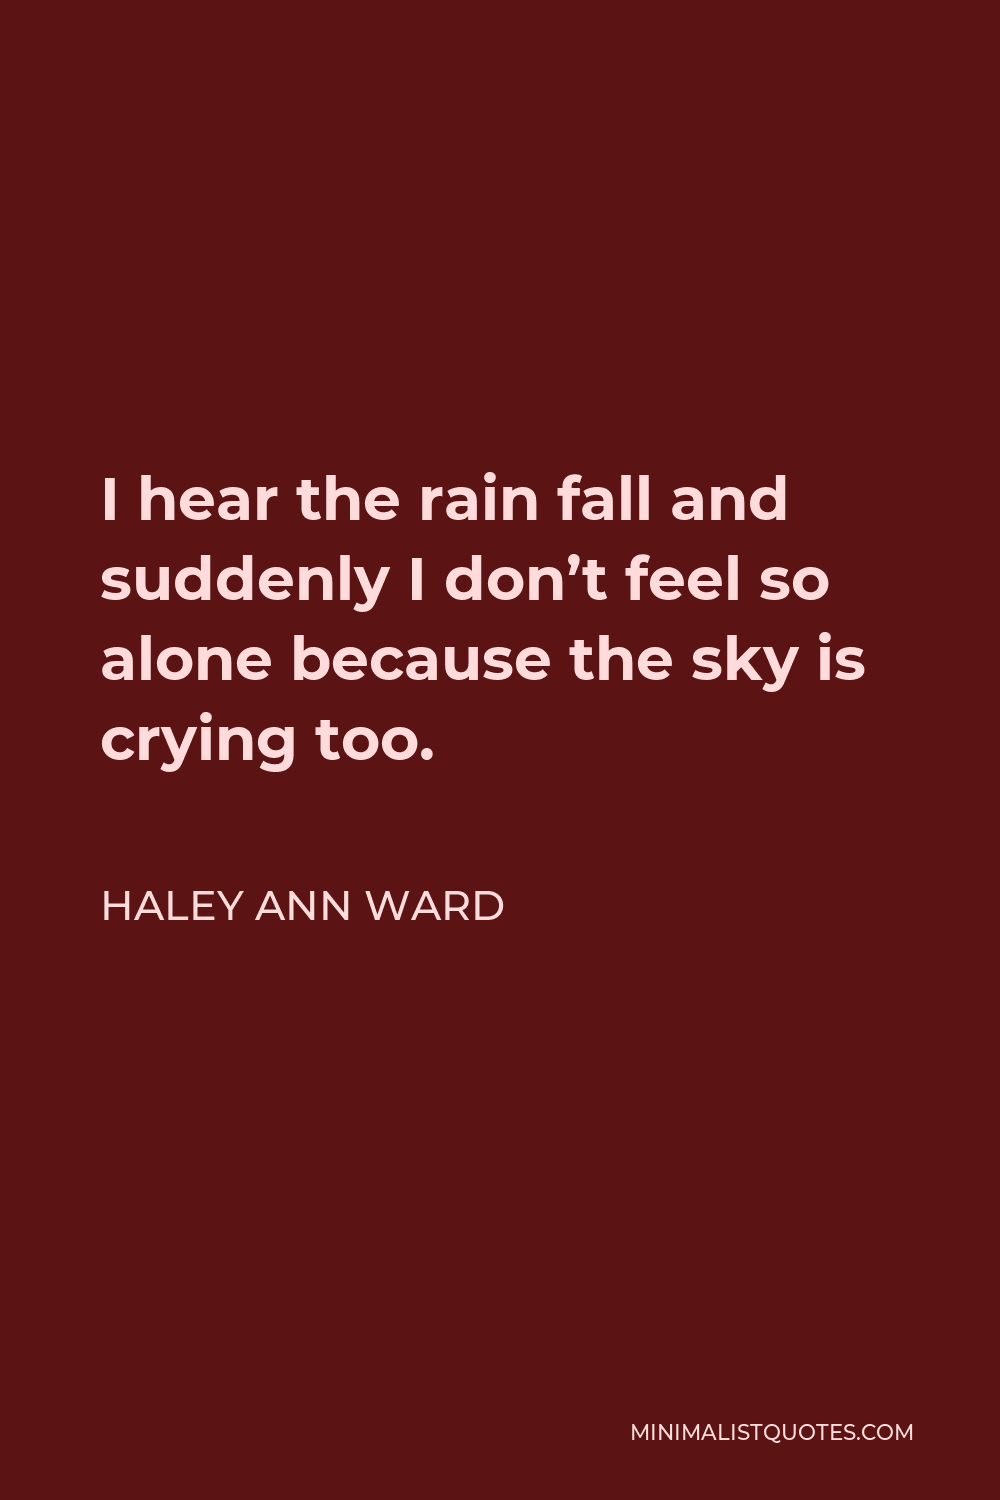 Haley Ann Ward Quote - I hear the rain fall and suddenly I don’t feel so alone because the sky is crying too.